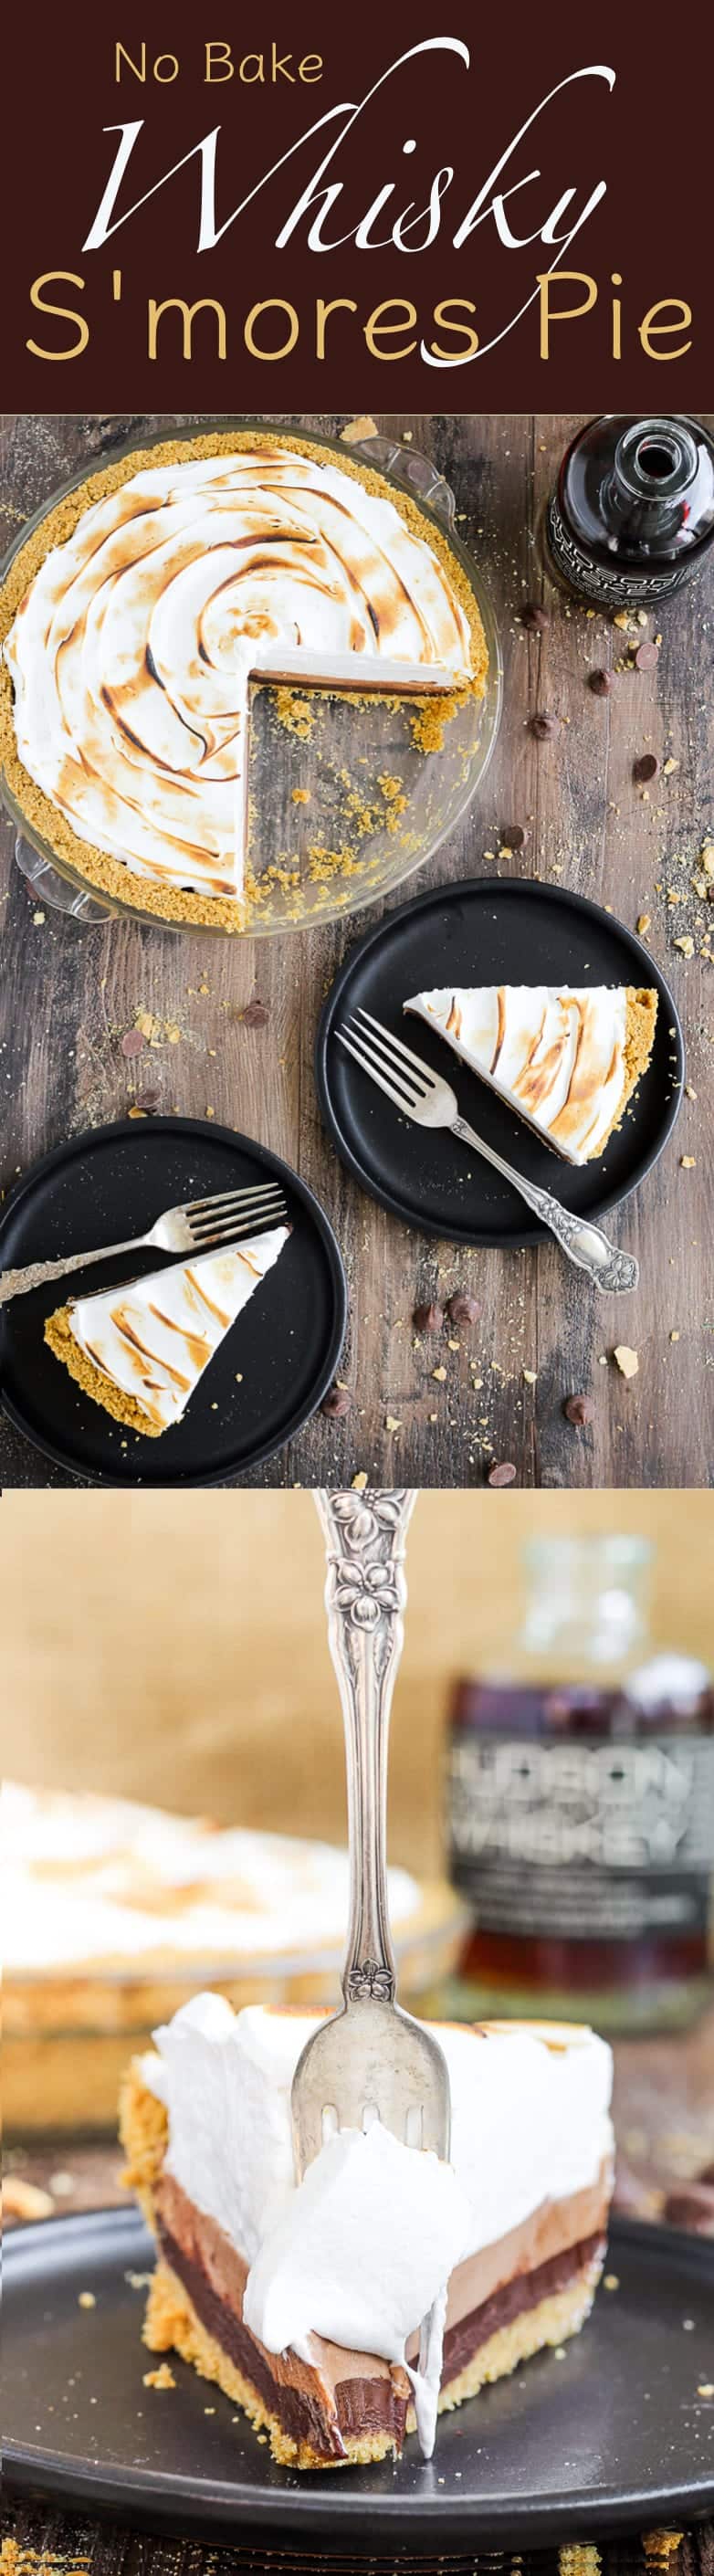 This No Bake Whiskey Smores Pie is a slice of Summer Heaven! There are layers of dark chocolate whisky ganache, milk chocolate mousse and fluffy toasted marshmallow in the perfect graham cracker crust. Go ahead…help yourself to another slice. 